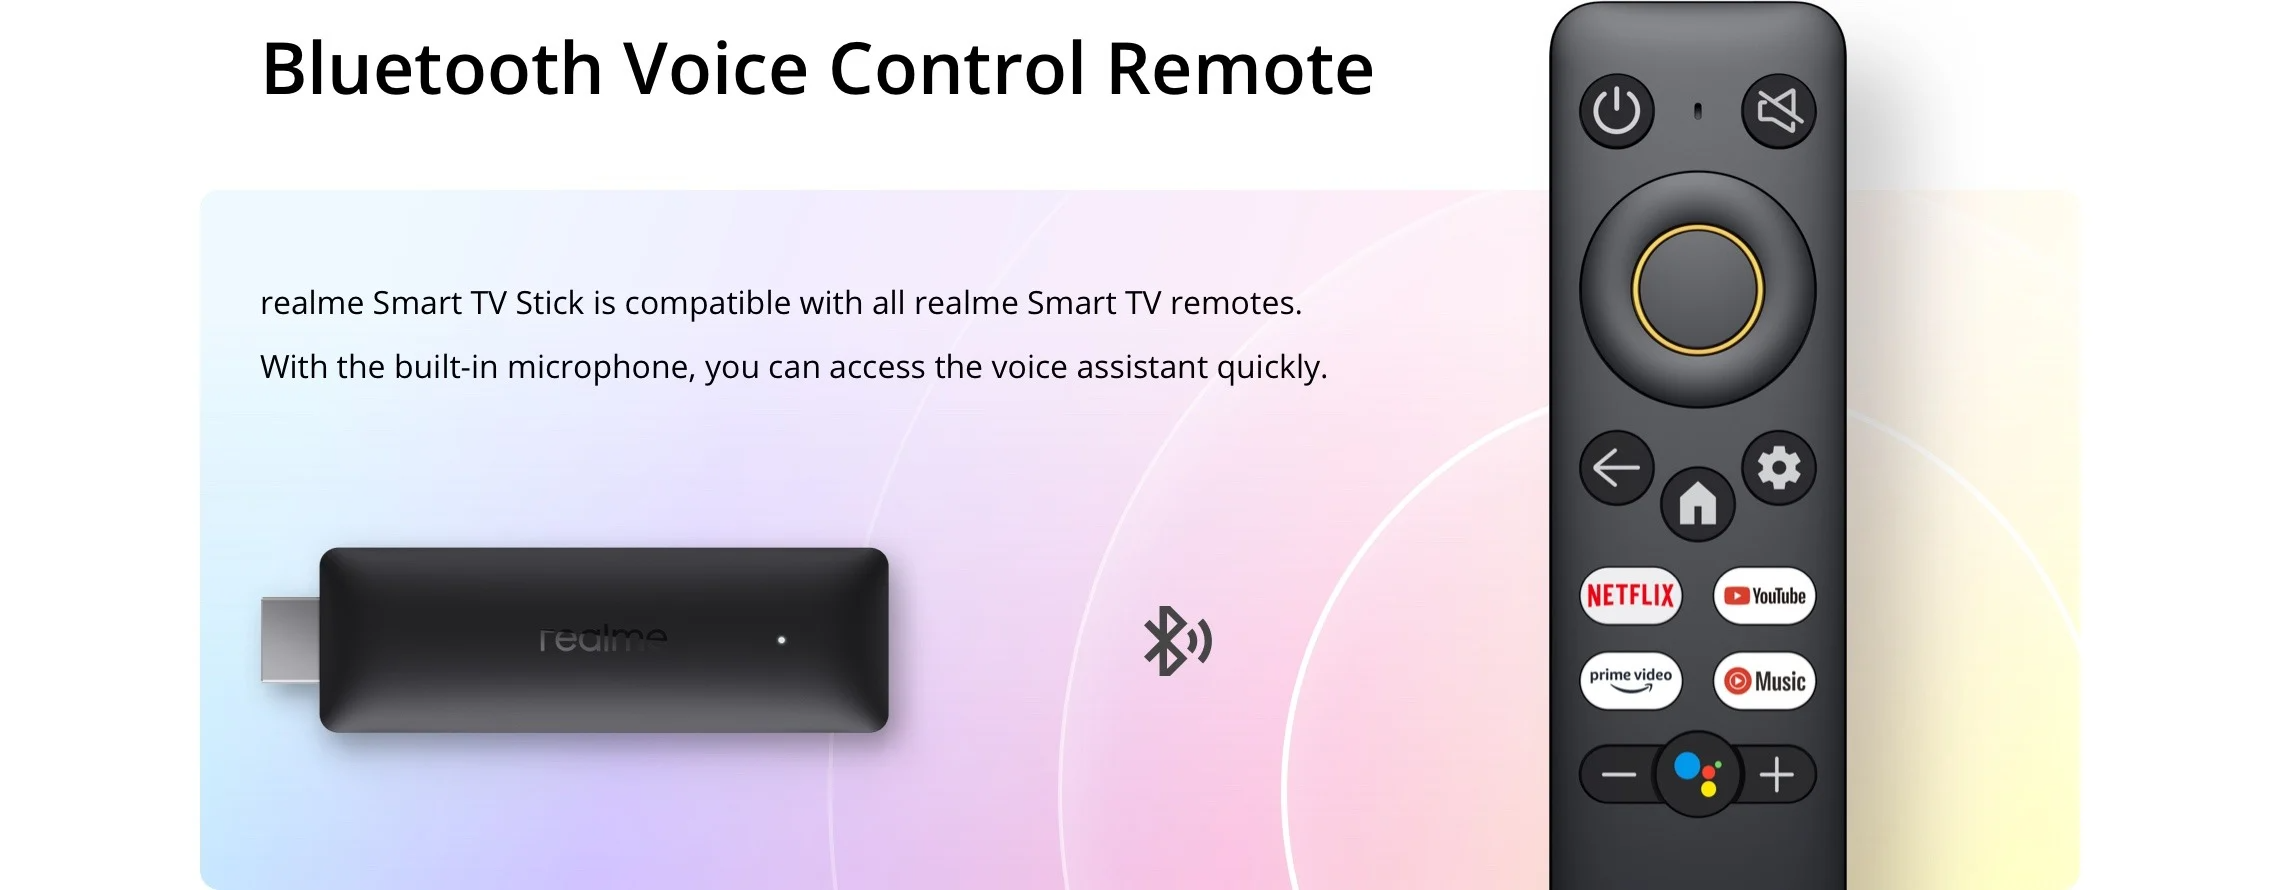 Realme android tv